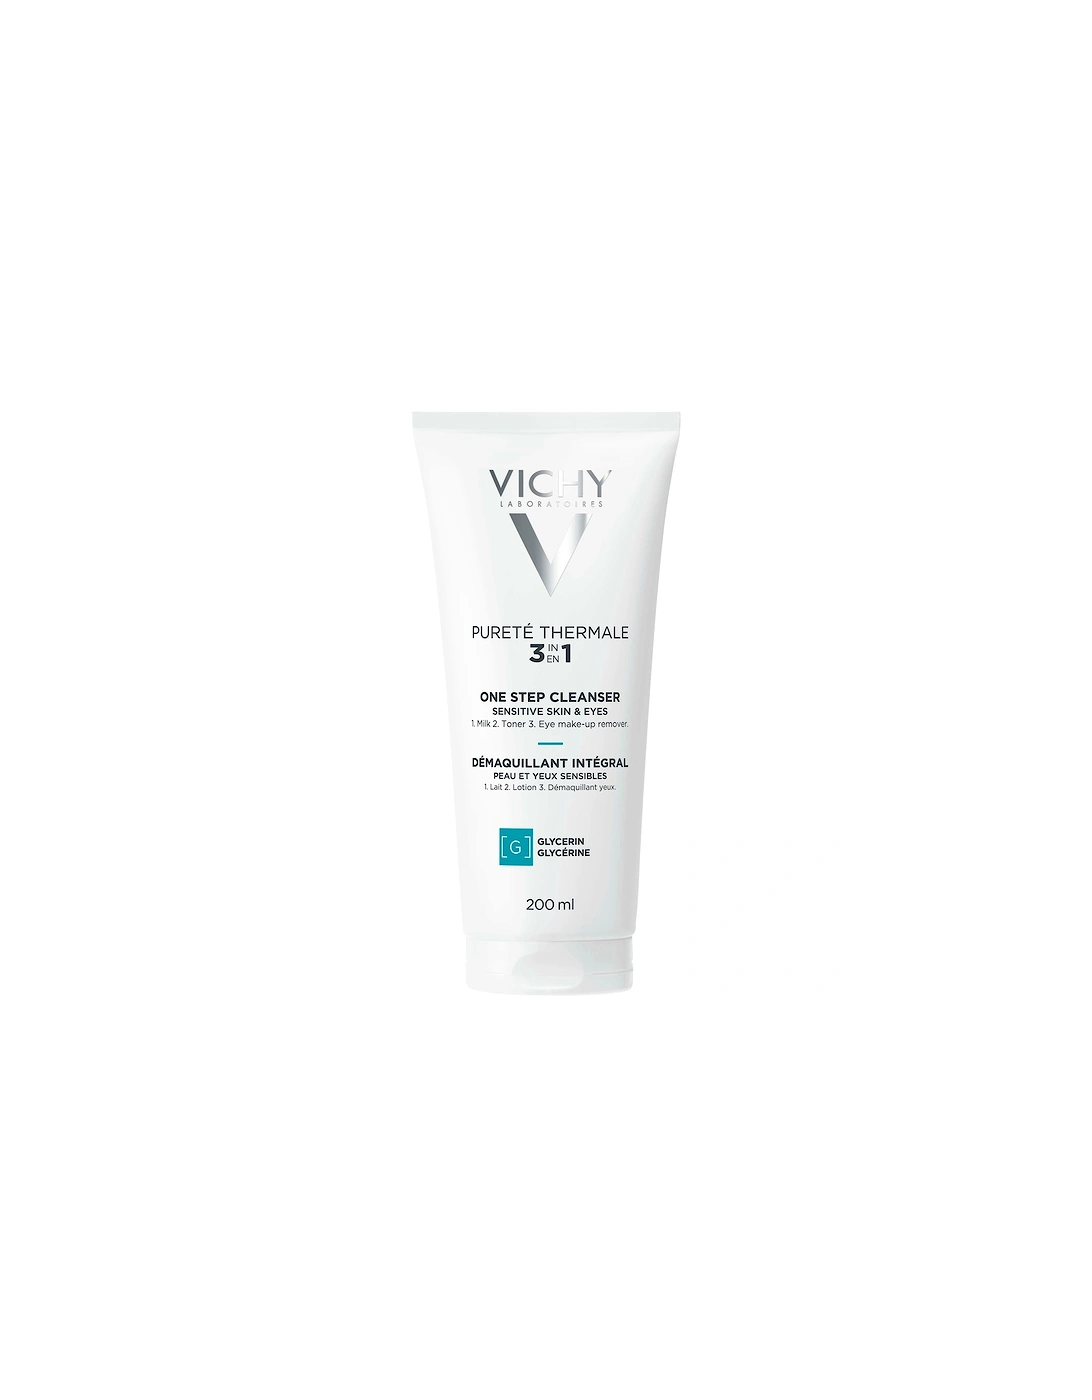 Pureté Thermale 3-in-1 One Step Cleanser 200ml - Vichy, 2 of 1